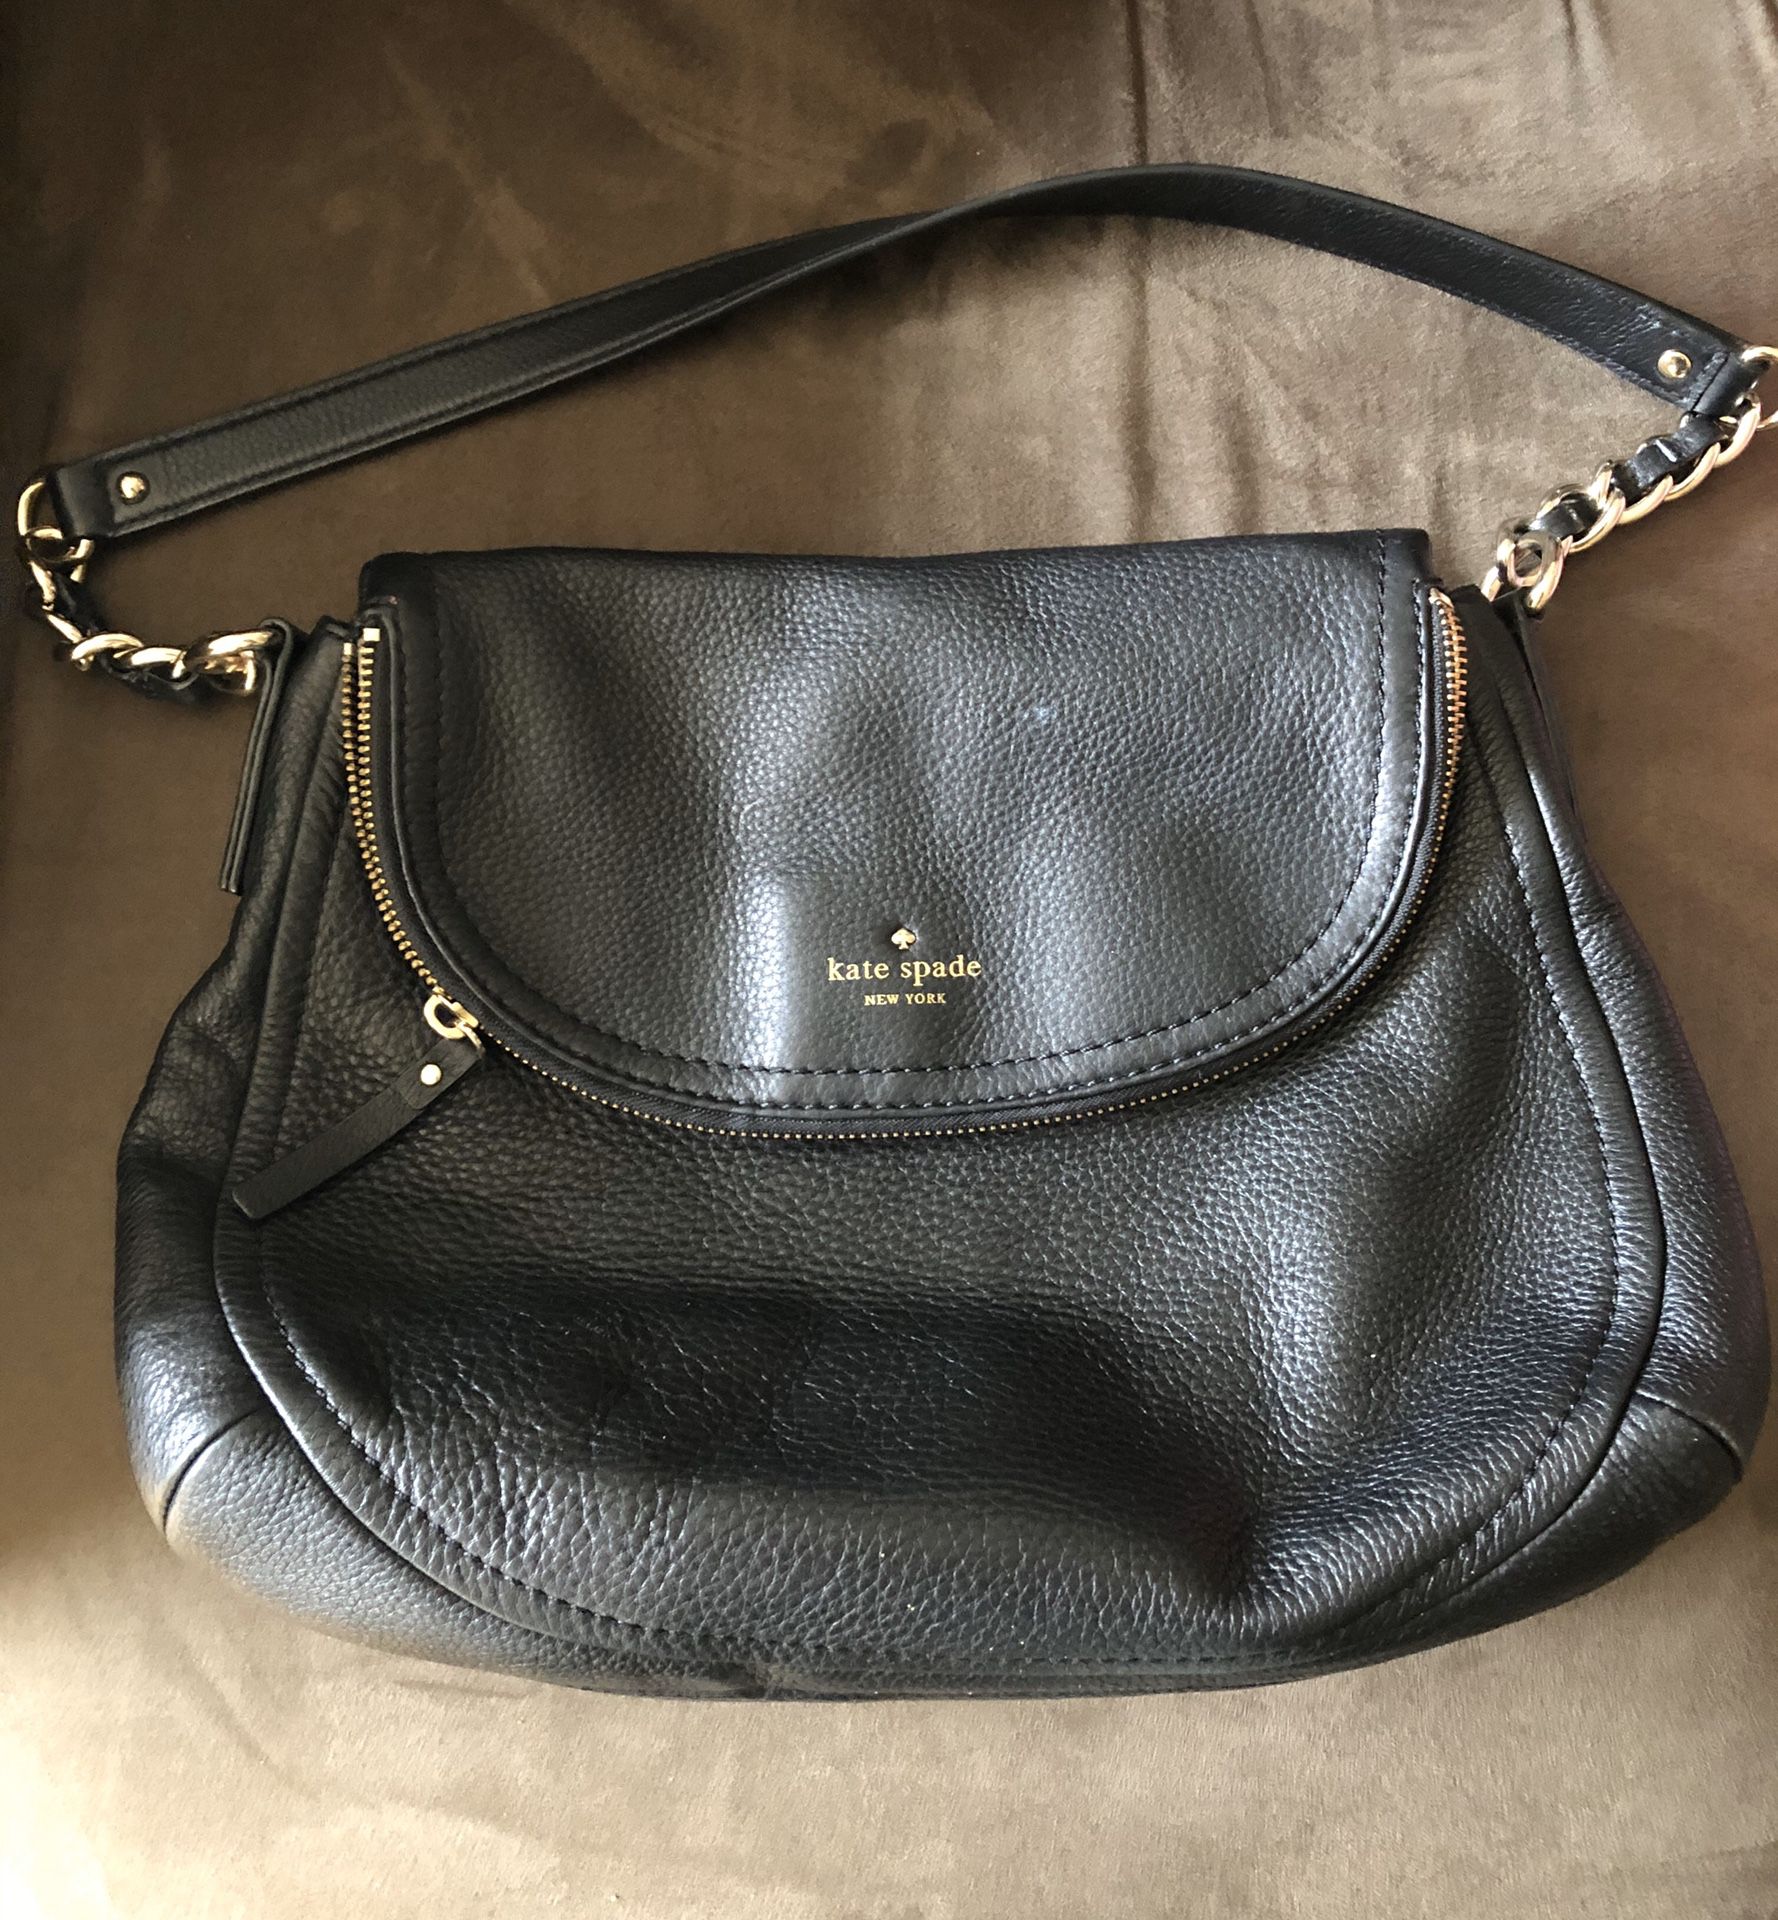 Black leather Kate Spade bag with short strap, striped lining